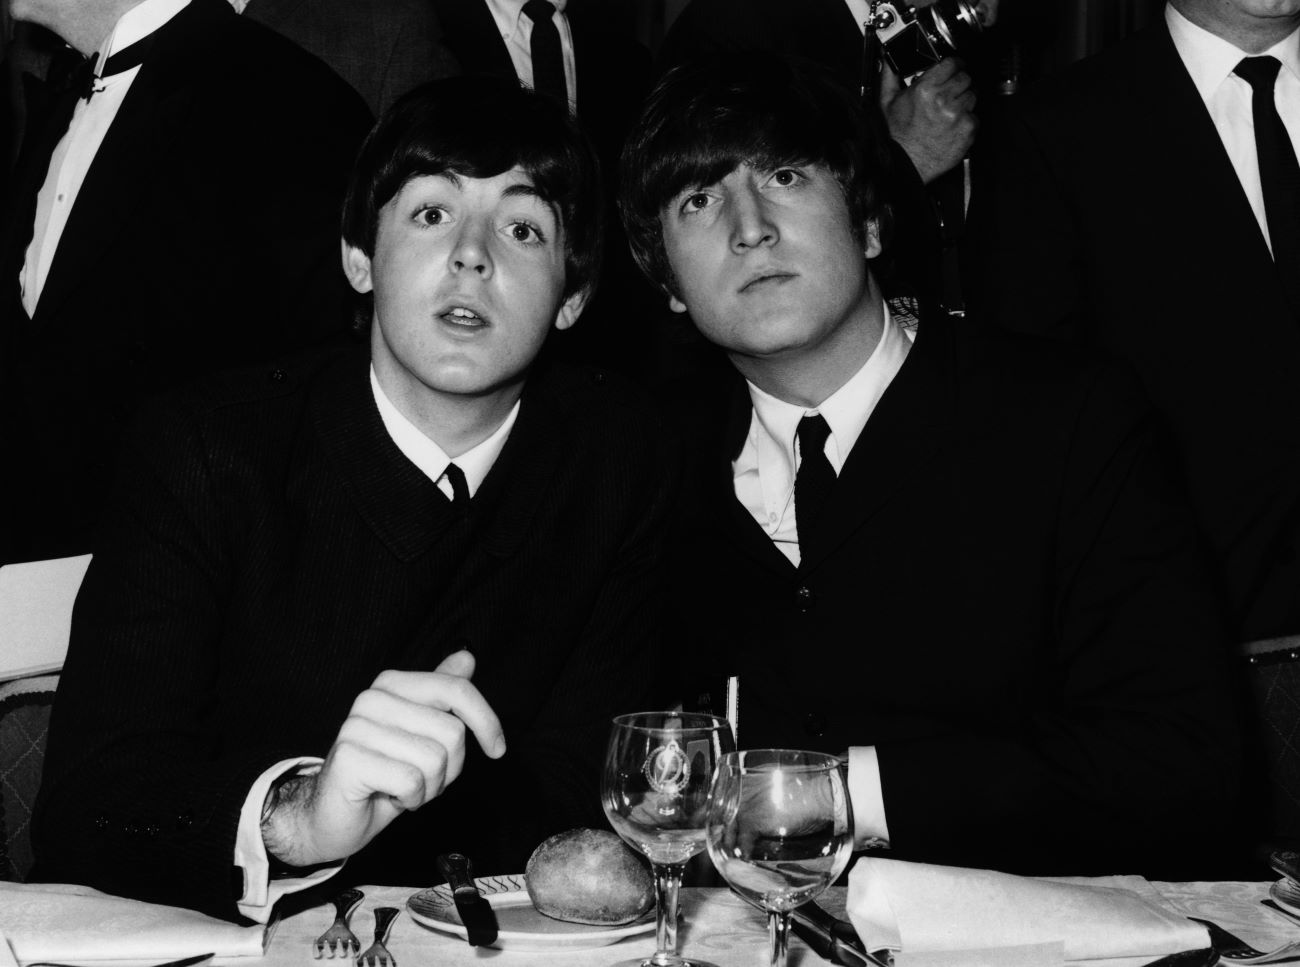 A black and white picture of Paul McCartney and John Lennon sitting at a dinner table together.